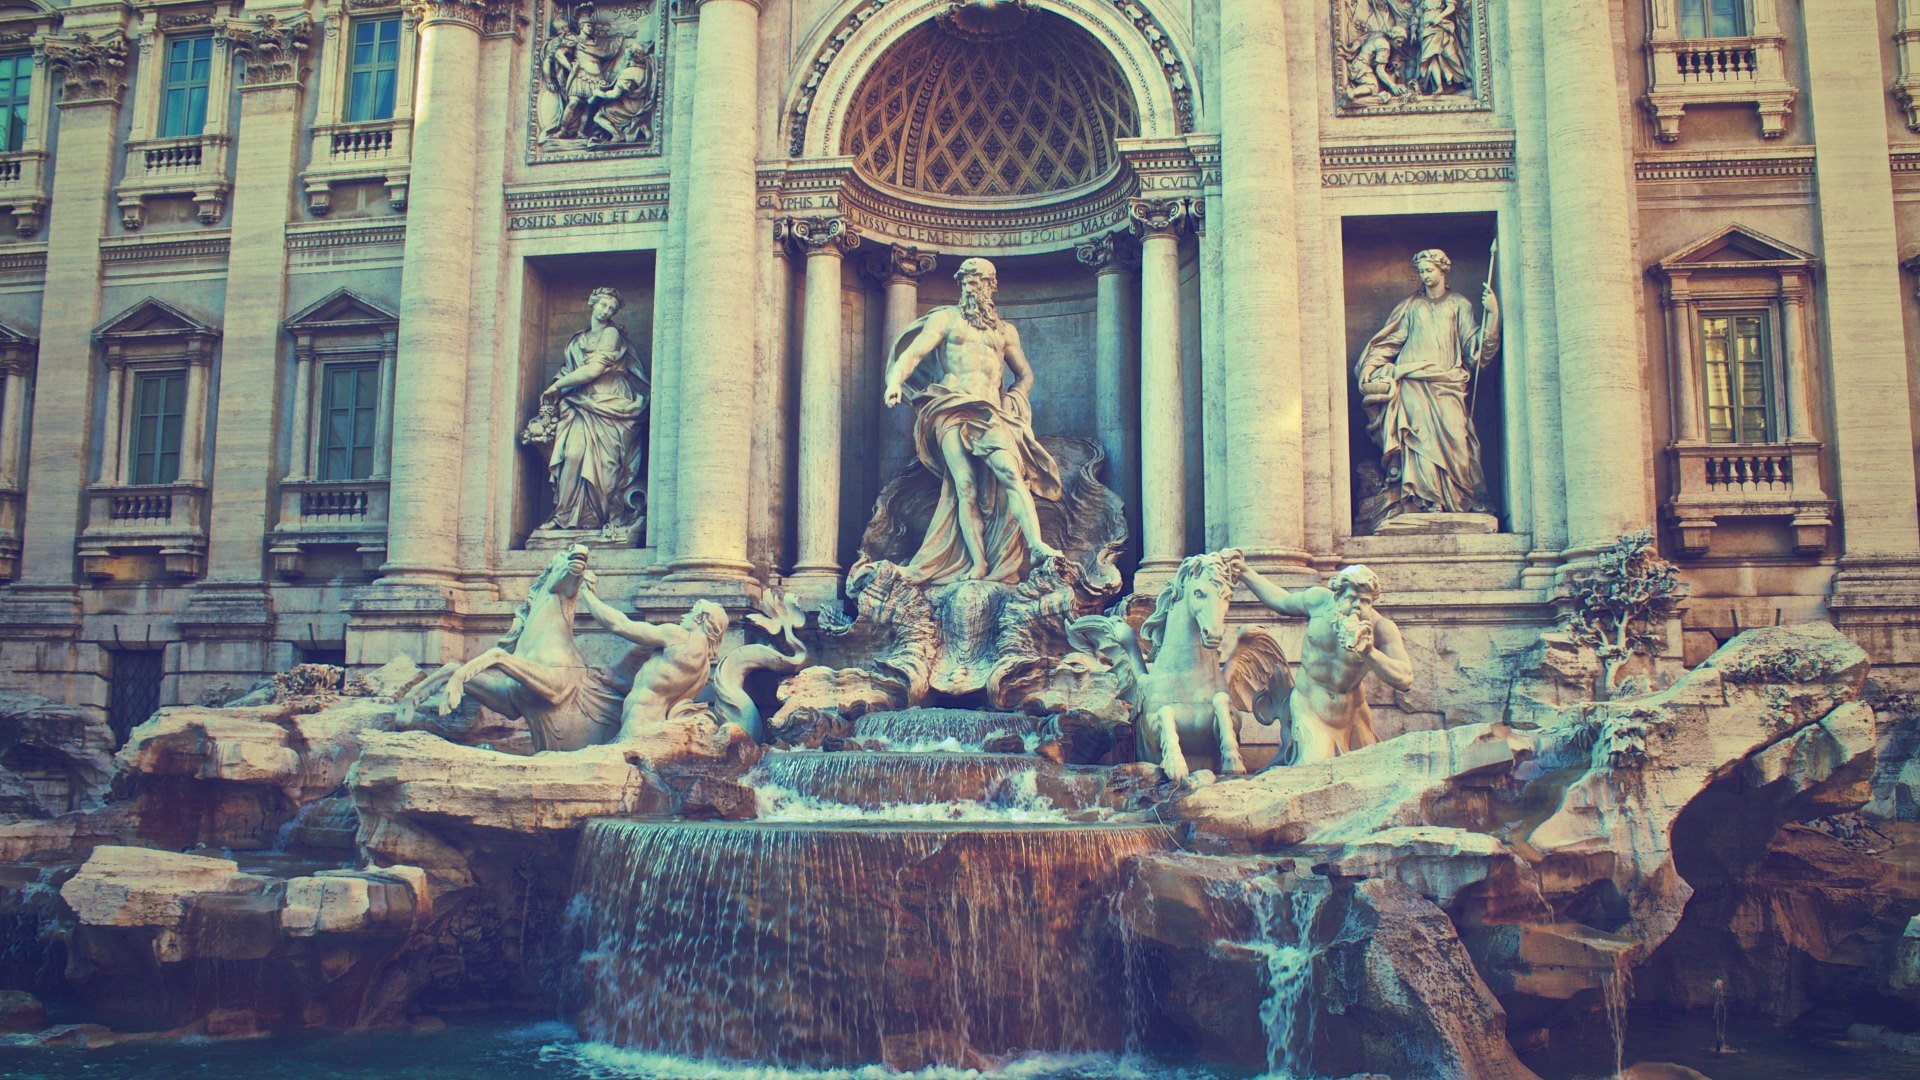 Trevi 4K wallpaper for your desktop or mobile screen free and easy to download